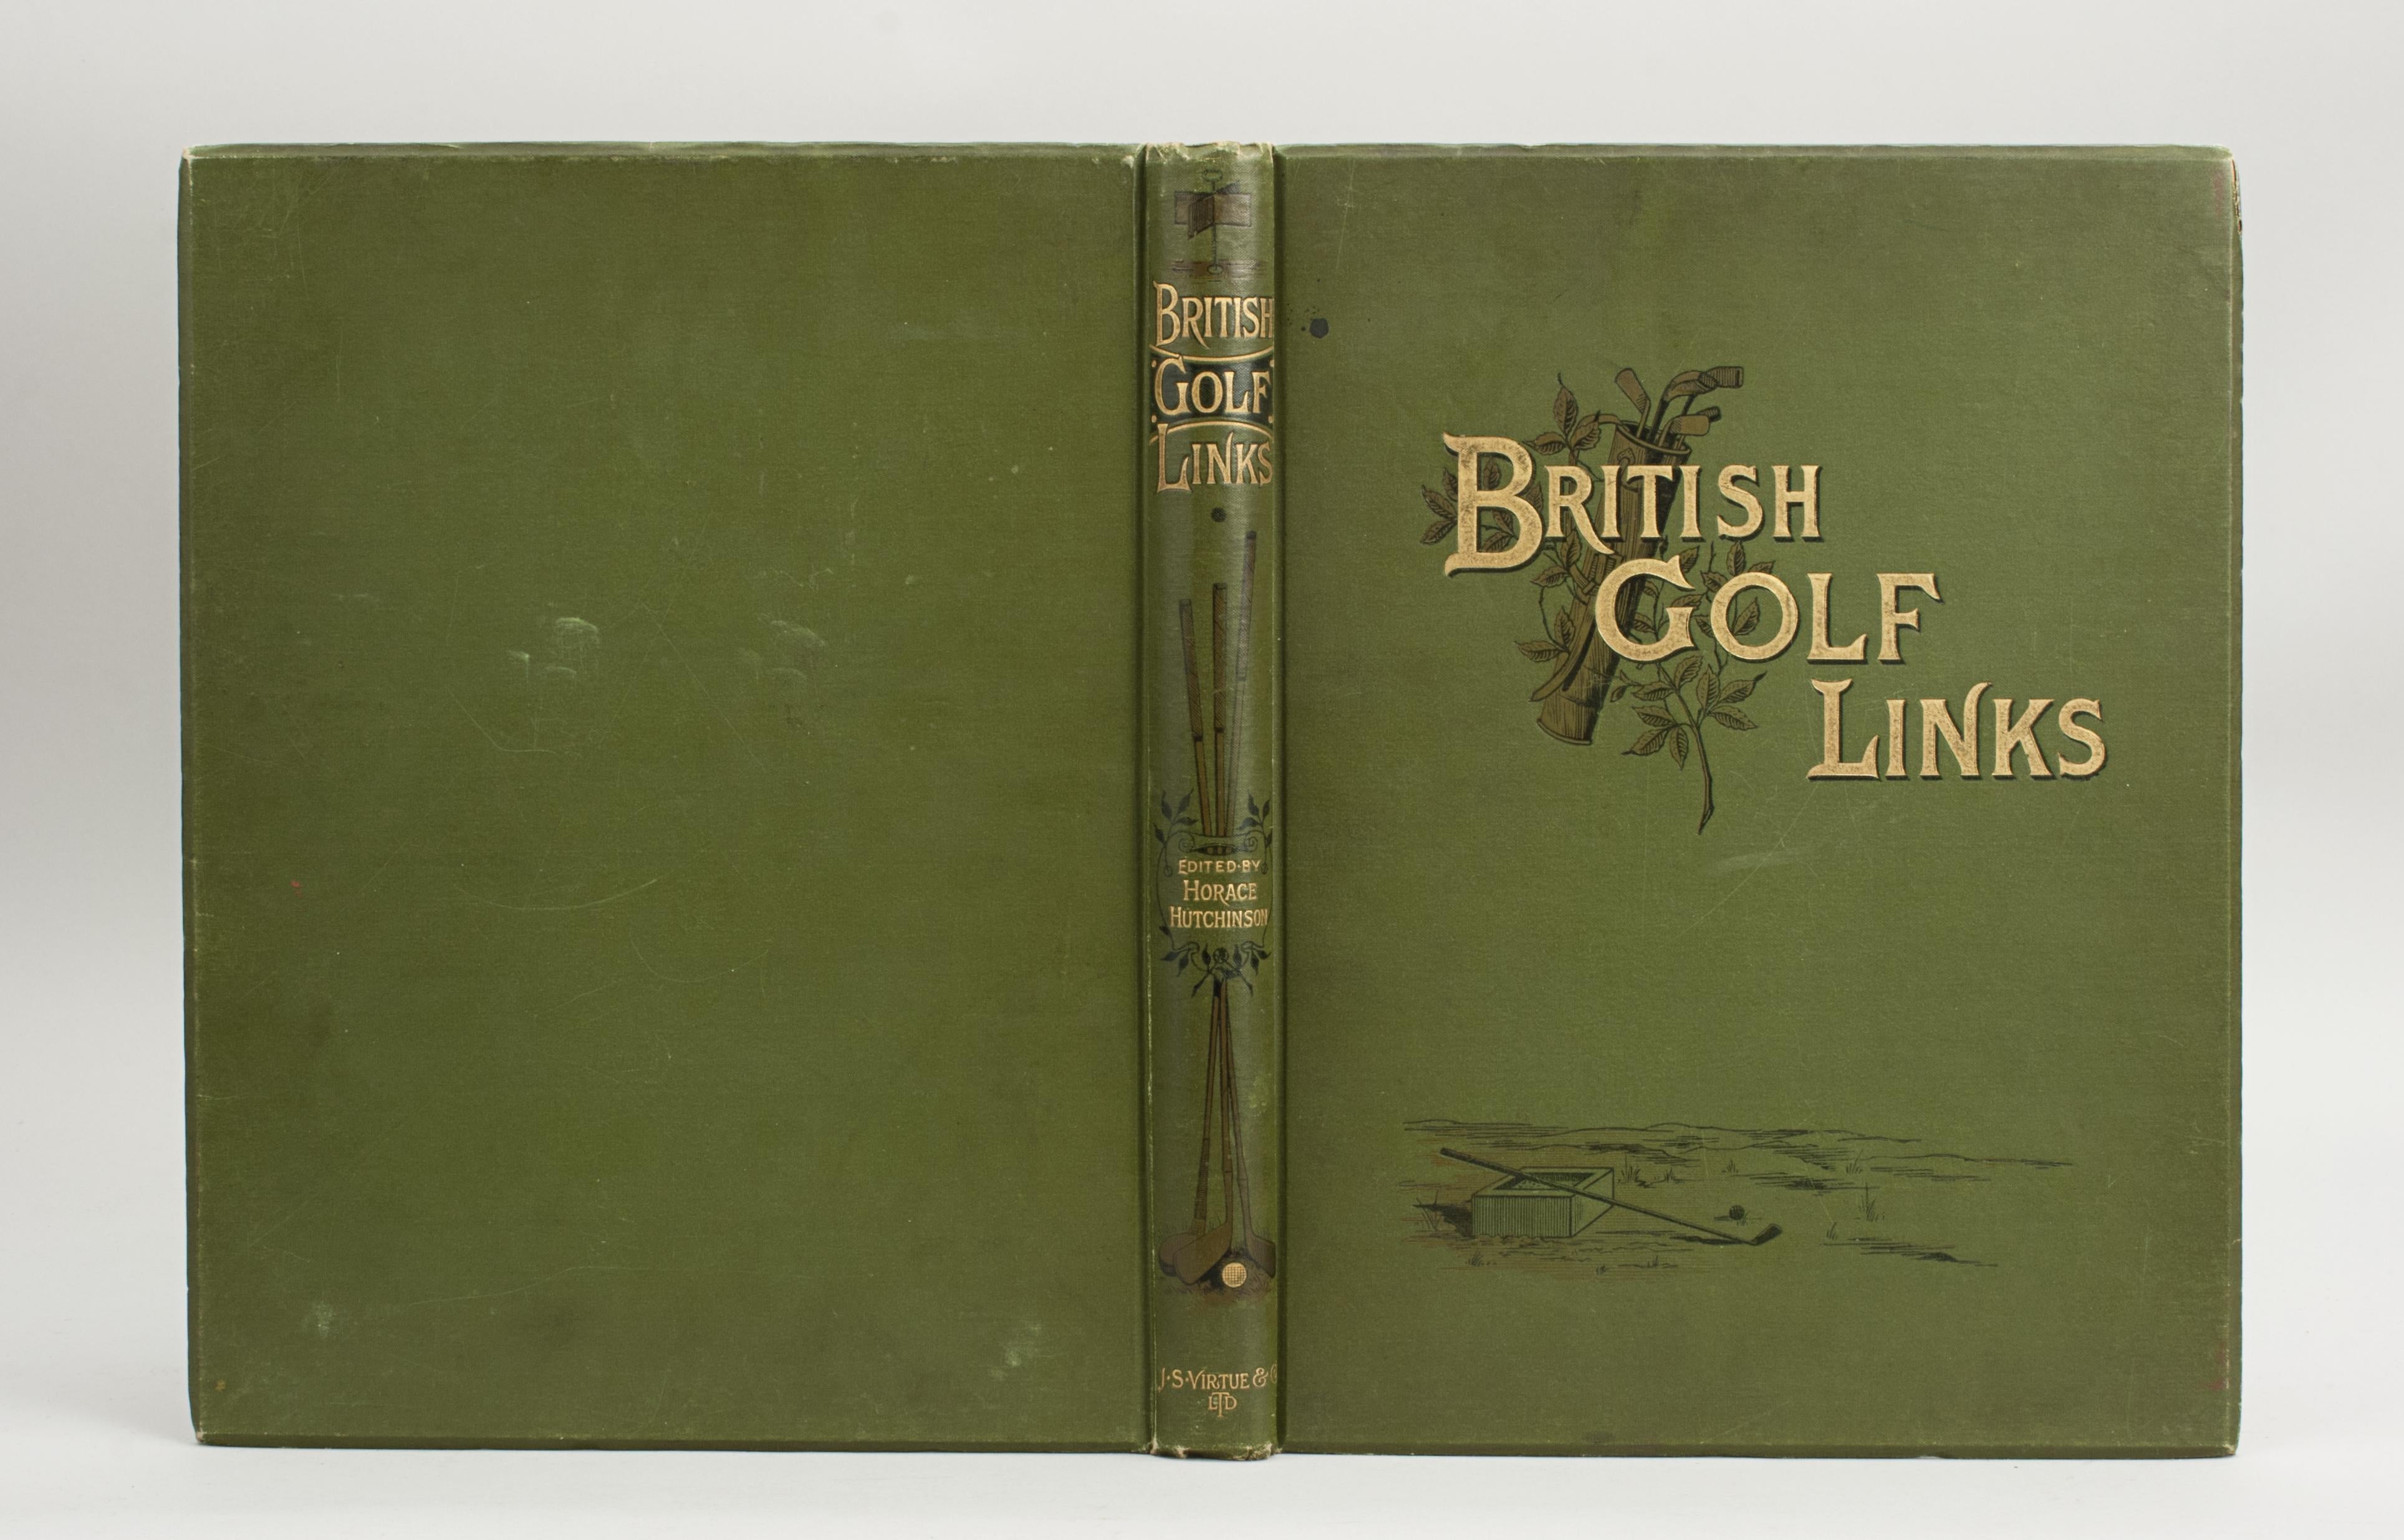 Golf book, British golf links by Horace Hutchinson.
An original copy of the first thorough study of the British golf links courses, one for the true connoisseur. This is a hard-bound copy with beveled boards, in outstanding condition with green